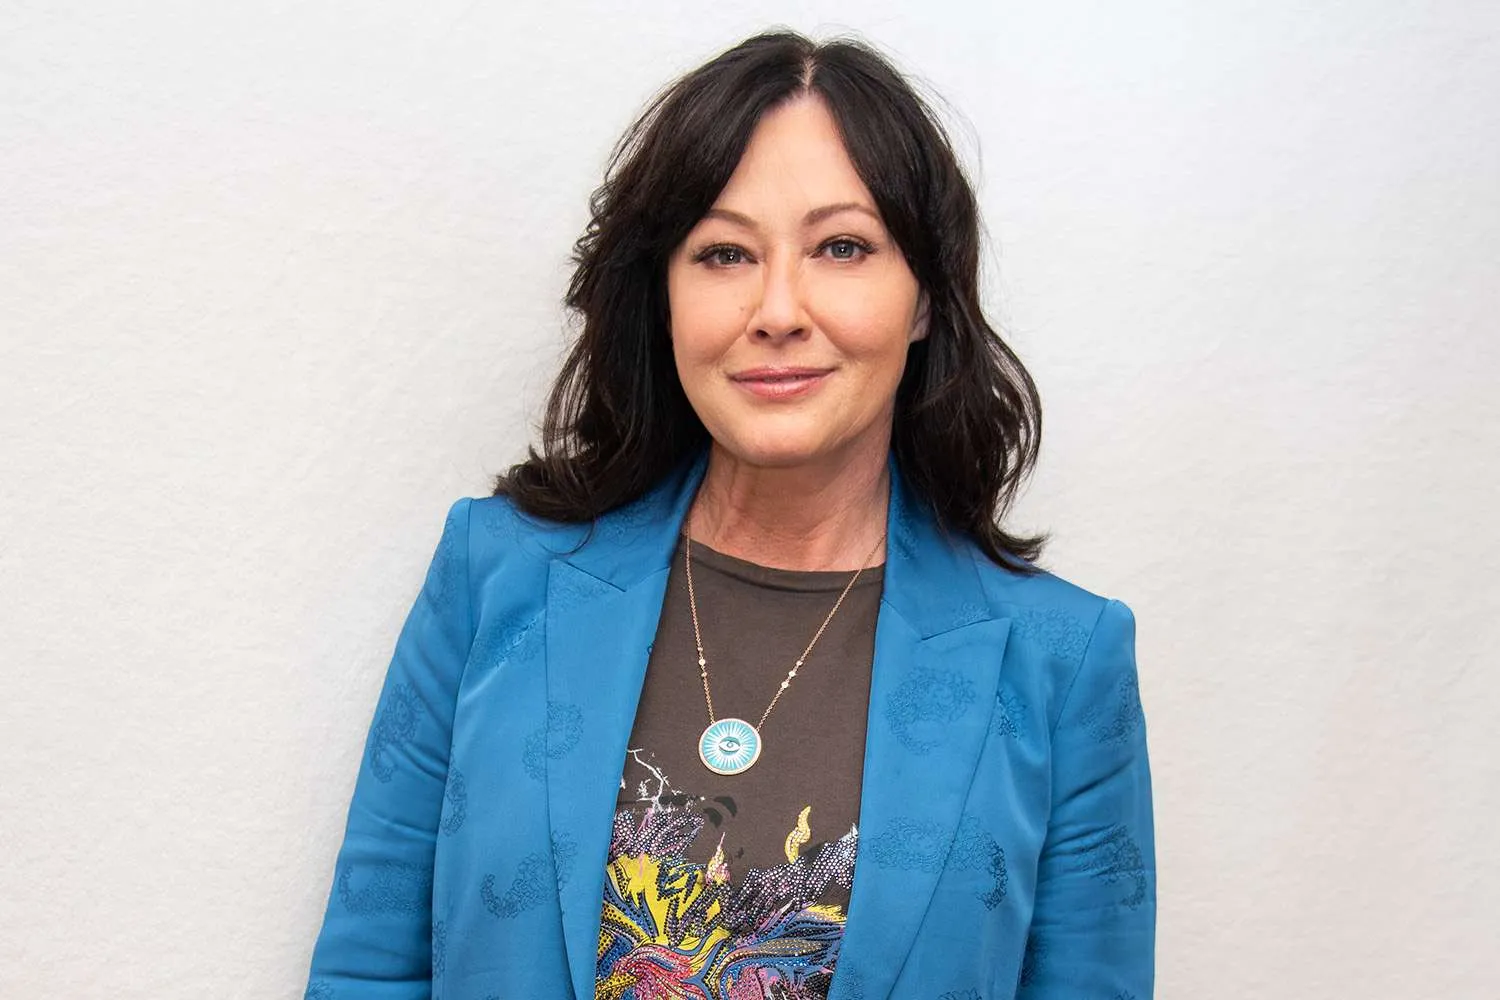 Why Did Shannen Doherty Leave Charmed?